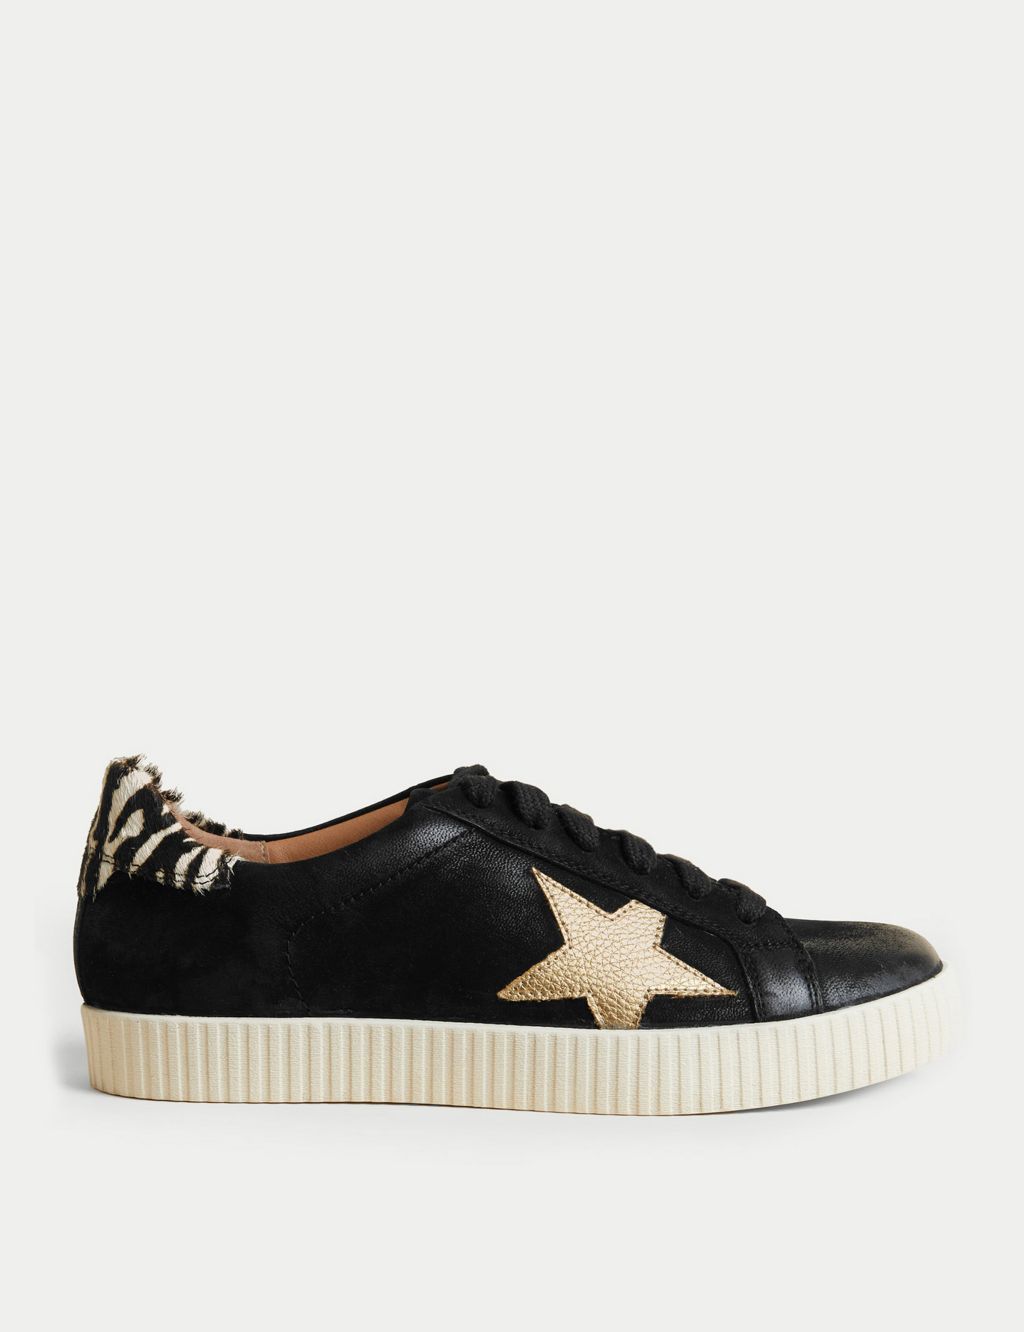 Lace Up Leather Star Trainers image 1